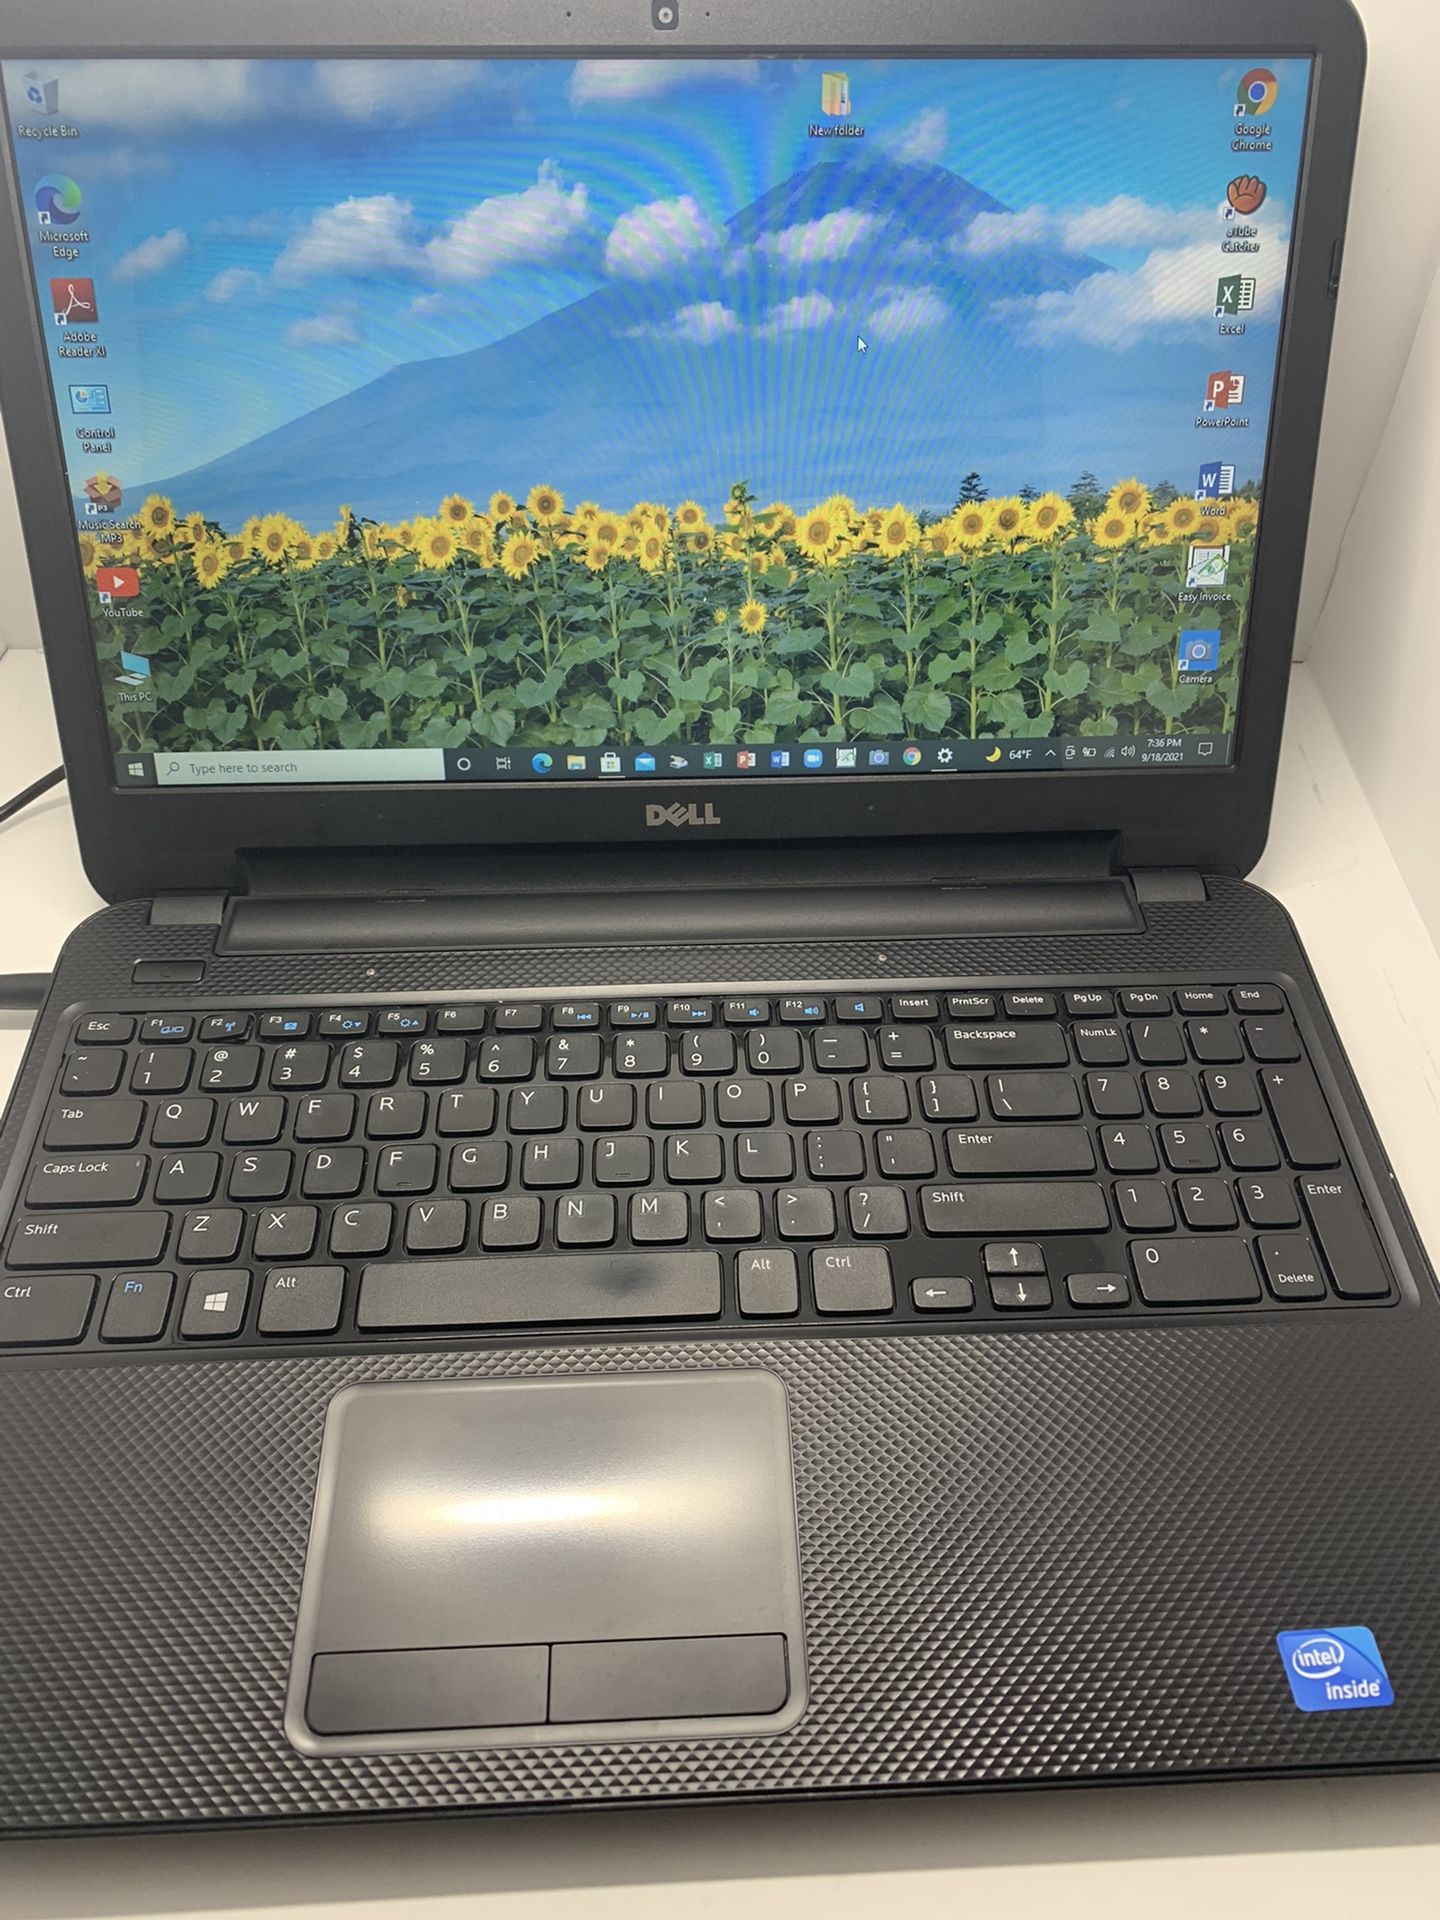 Very Nice And Clean …DELL INSPIRON…3521…320GB   HHD….8.0 GB RAM .  FASTER  and  READY FOR CLASSES  ON LINE OR WORK FROM HOME (ZOOM)